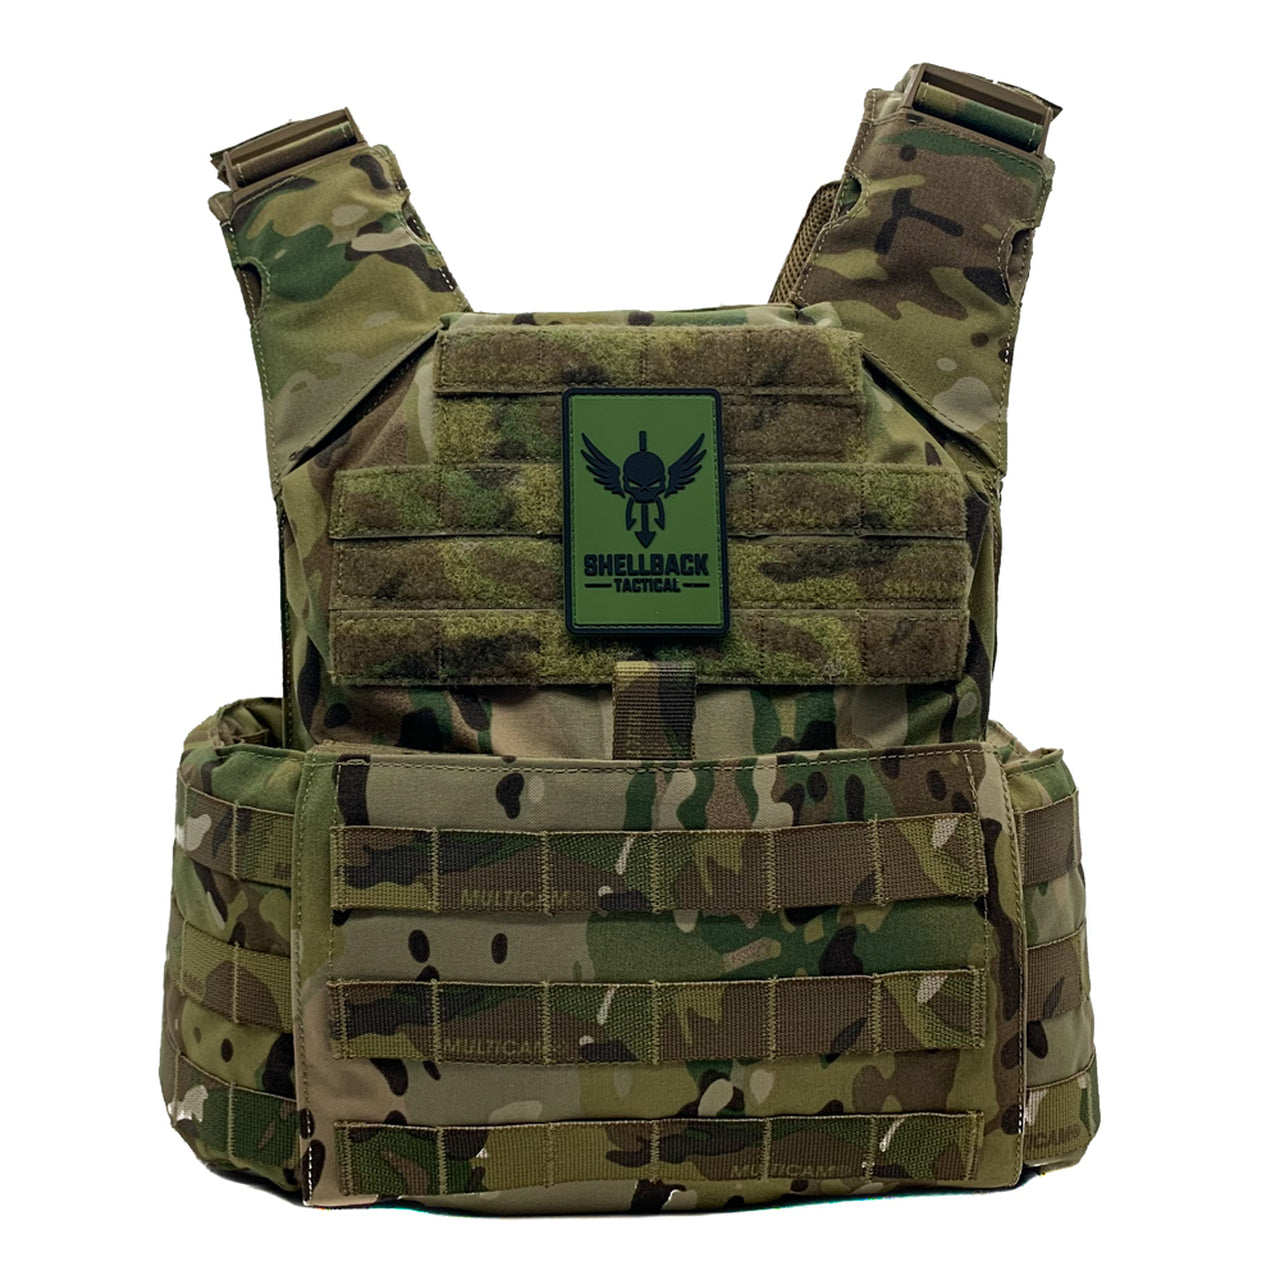 A Shellback Tactical Skirmish Plate Carrier with a camouflage design.